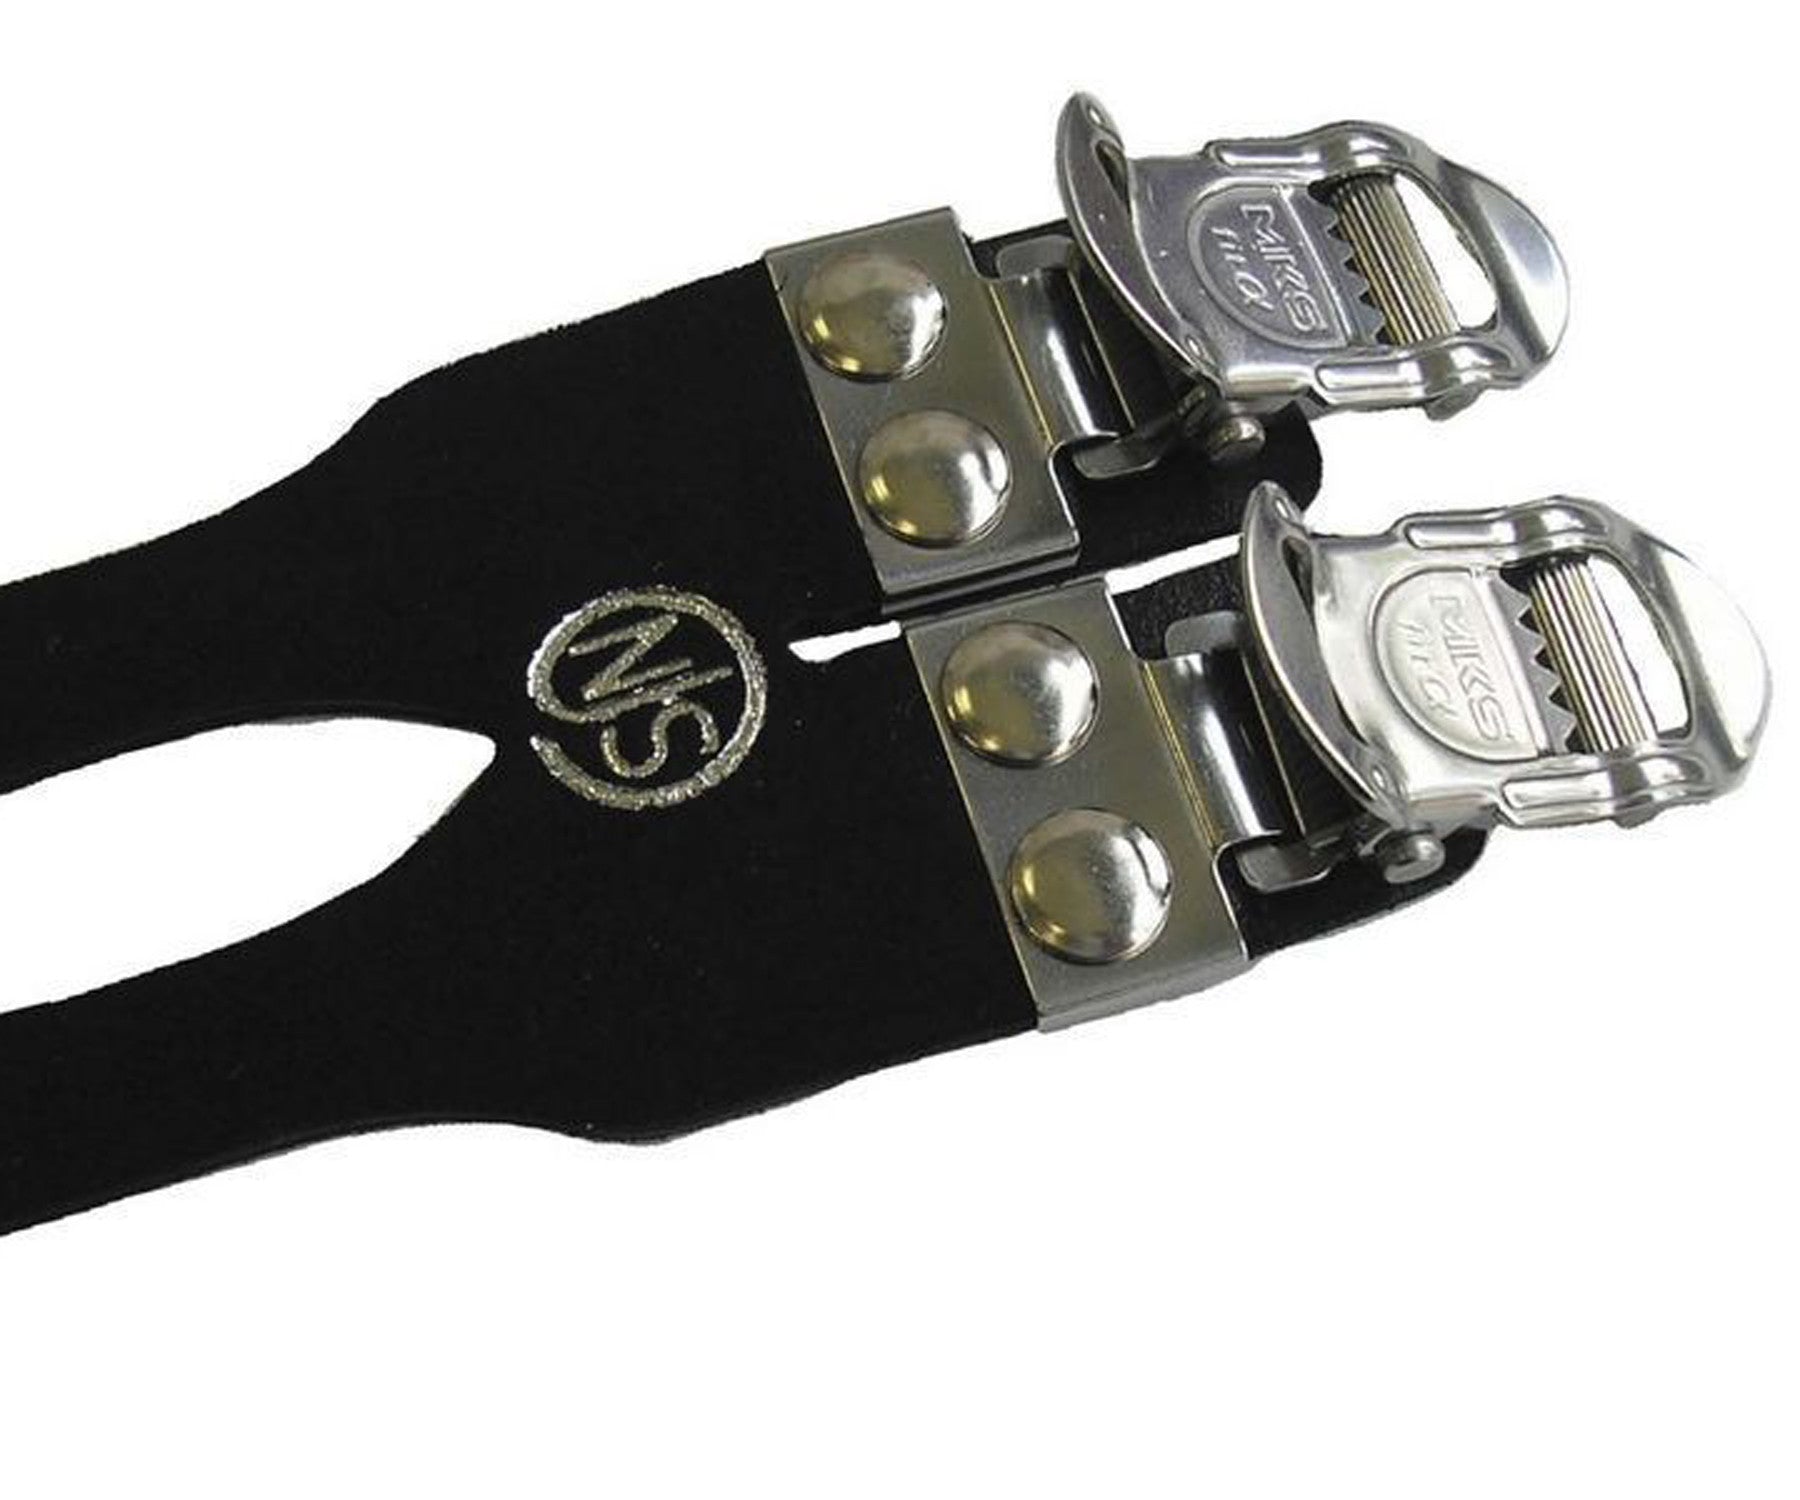 MKS Fit-A Sports NJS laminated leather double straps - Retrogression Fixed Gear